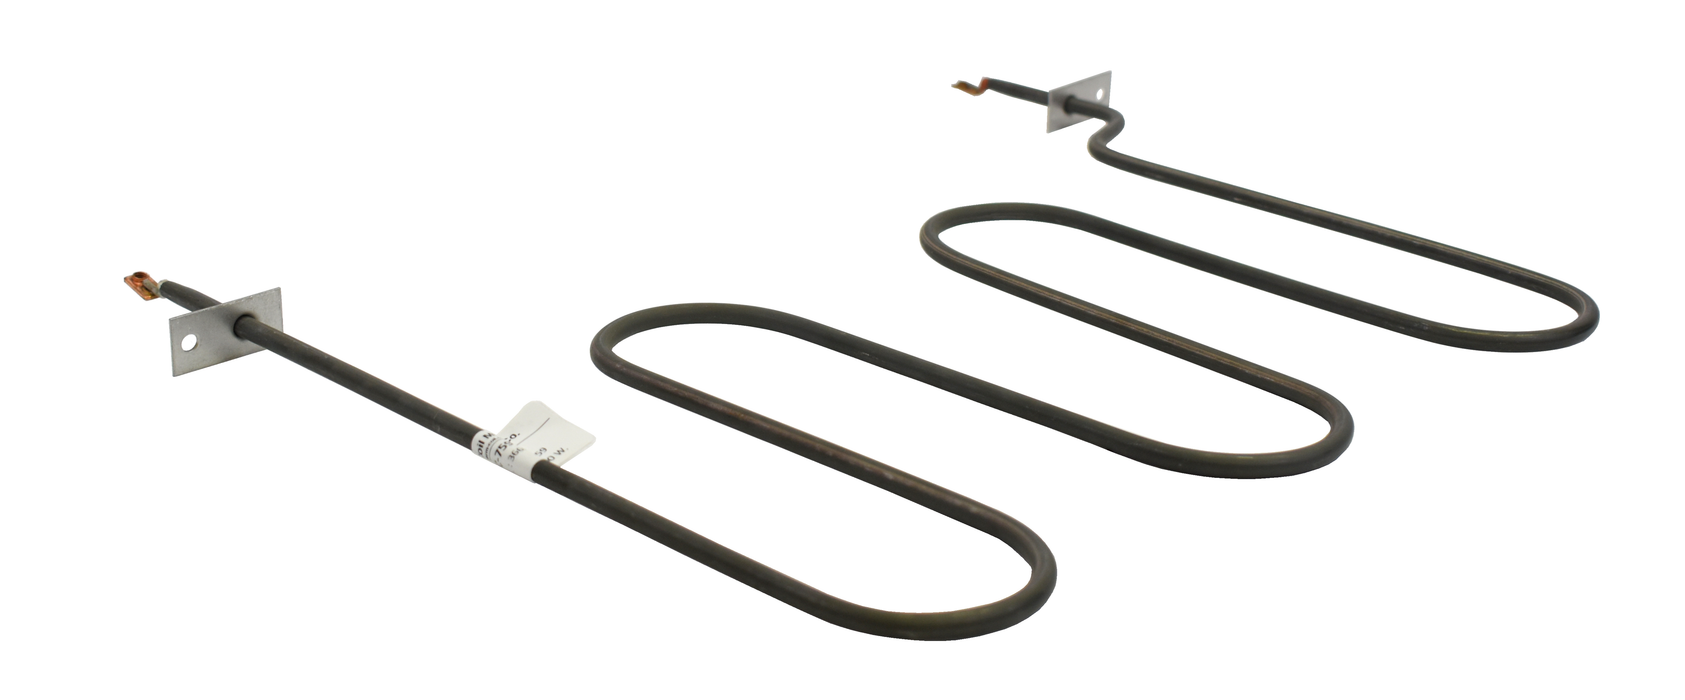 Model TC-759: Modern Maid 74-06-156 Equivalent Range/Oven Broil Replacement Element, 2,500W @ 250V